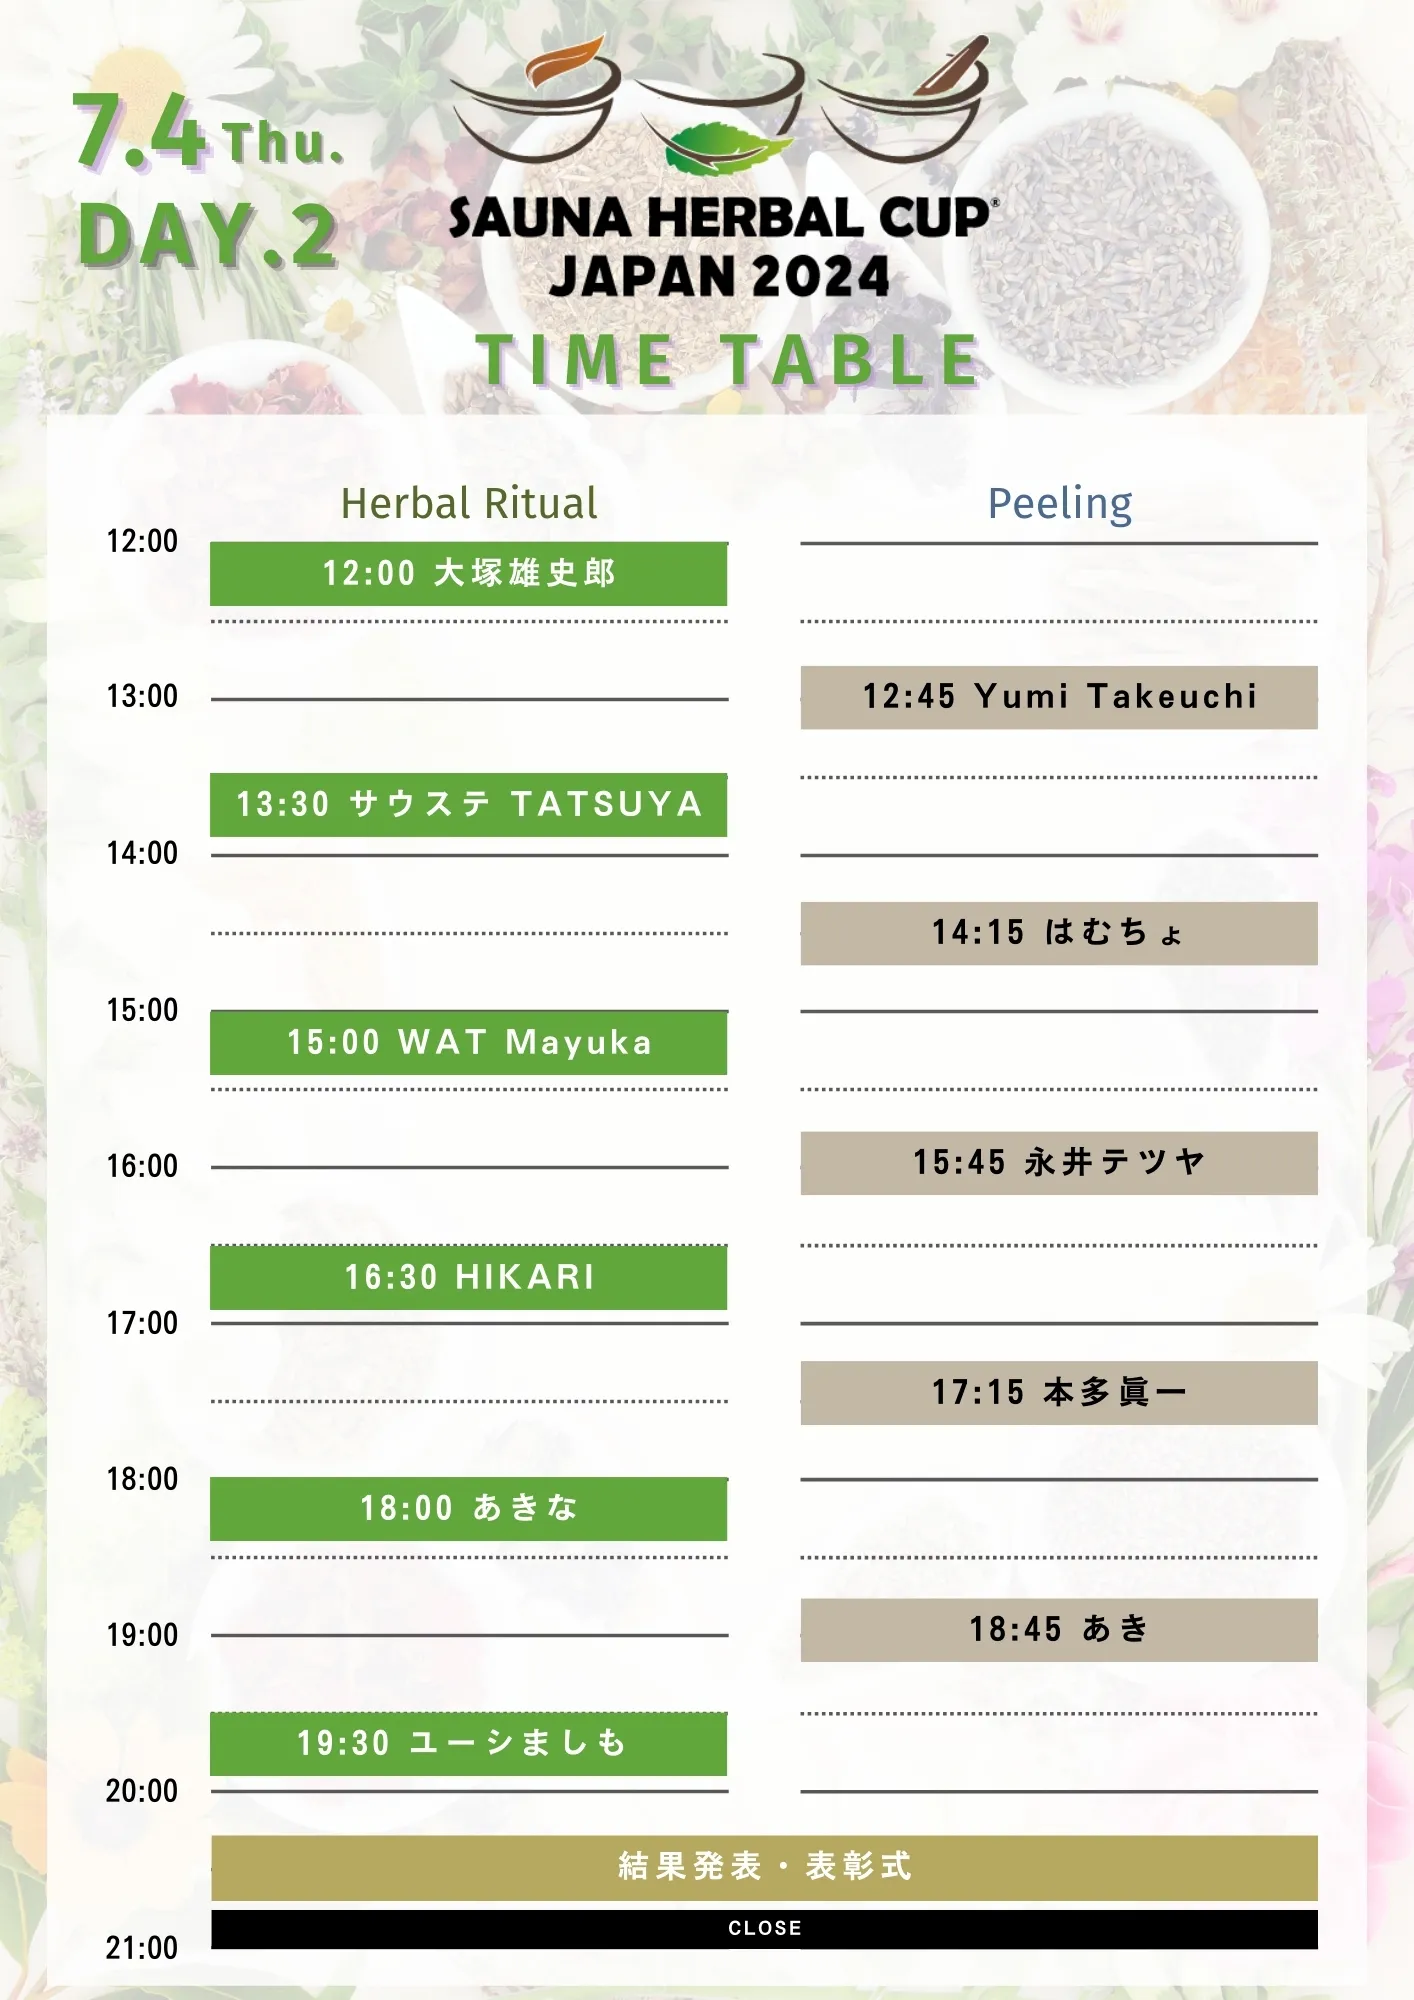 TIME TABLE【DAY.2】